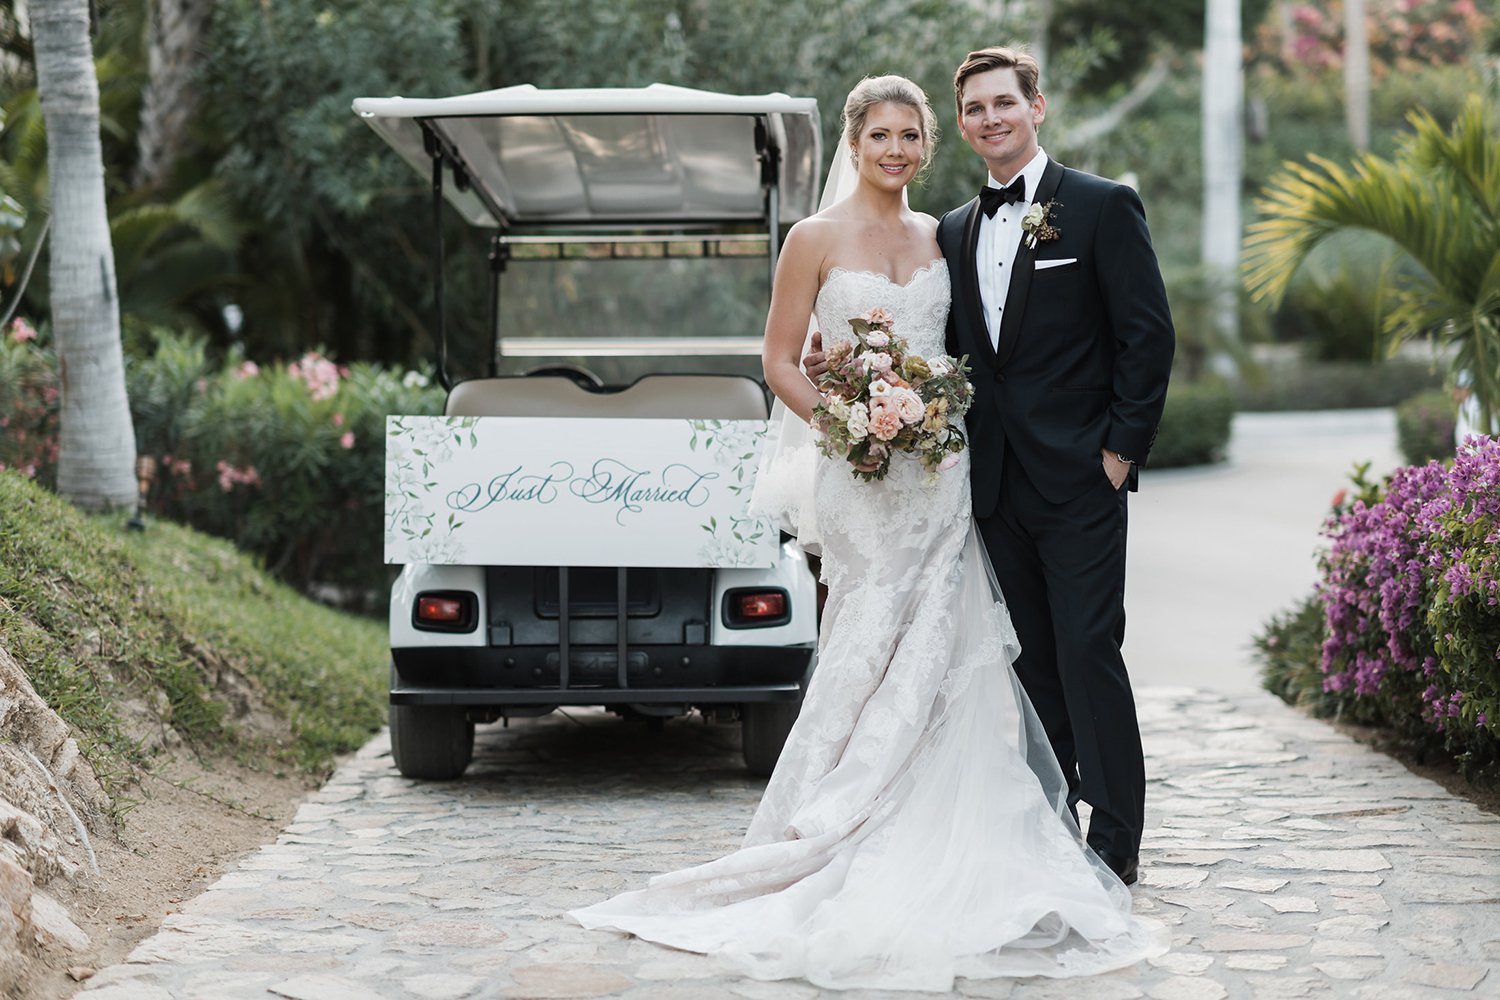 golf cart decorated for just married newlyweds